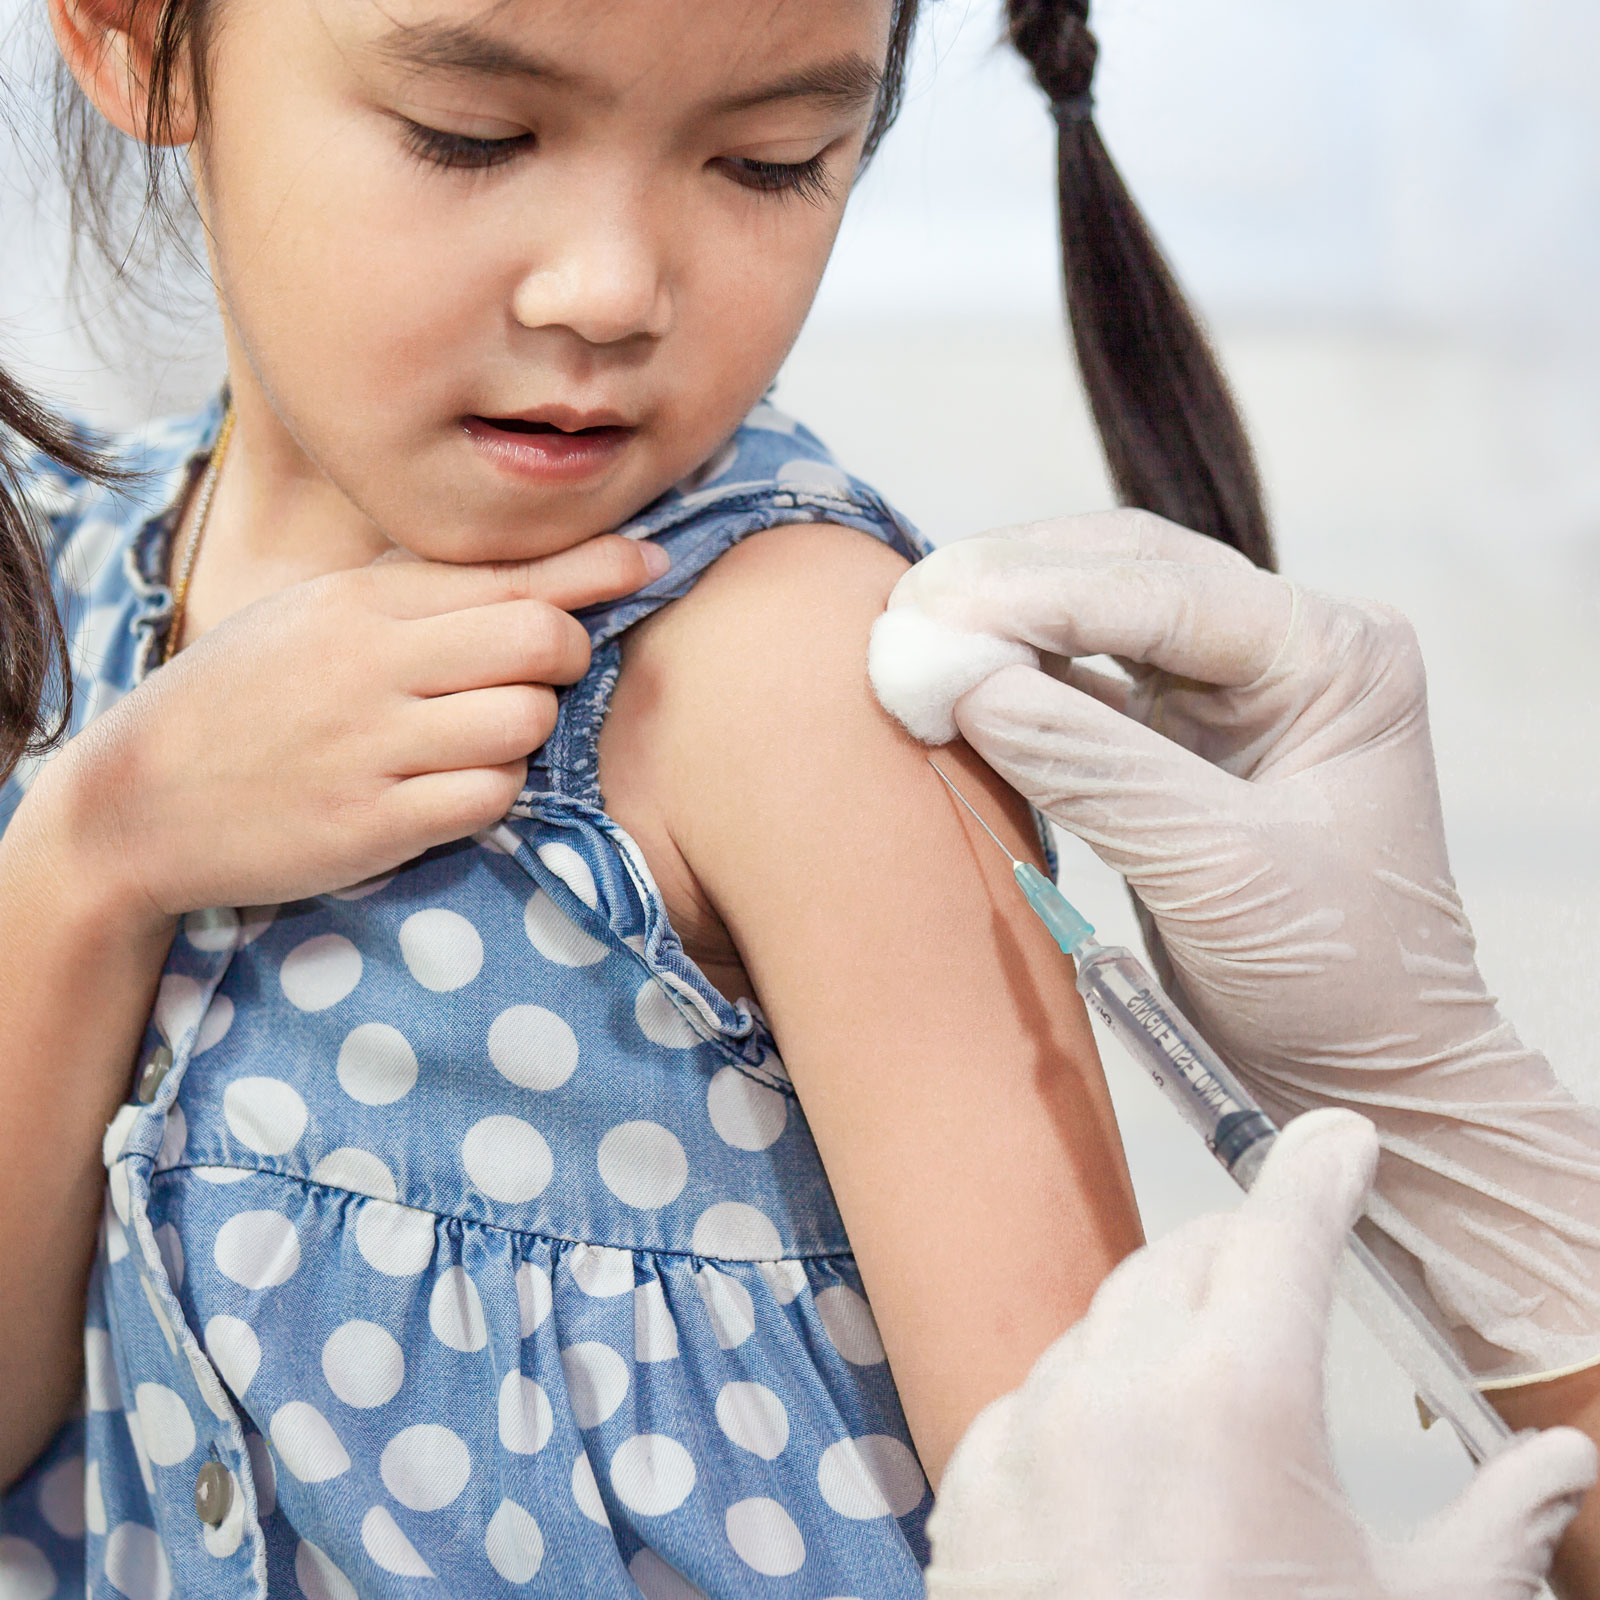 a young girl with pigtails gets a vaccine shot in her arm